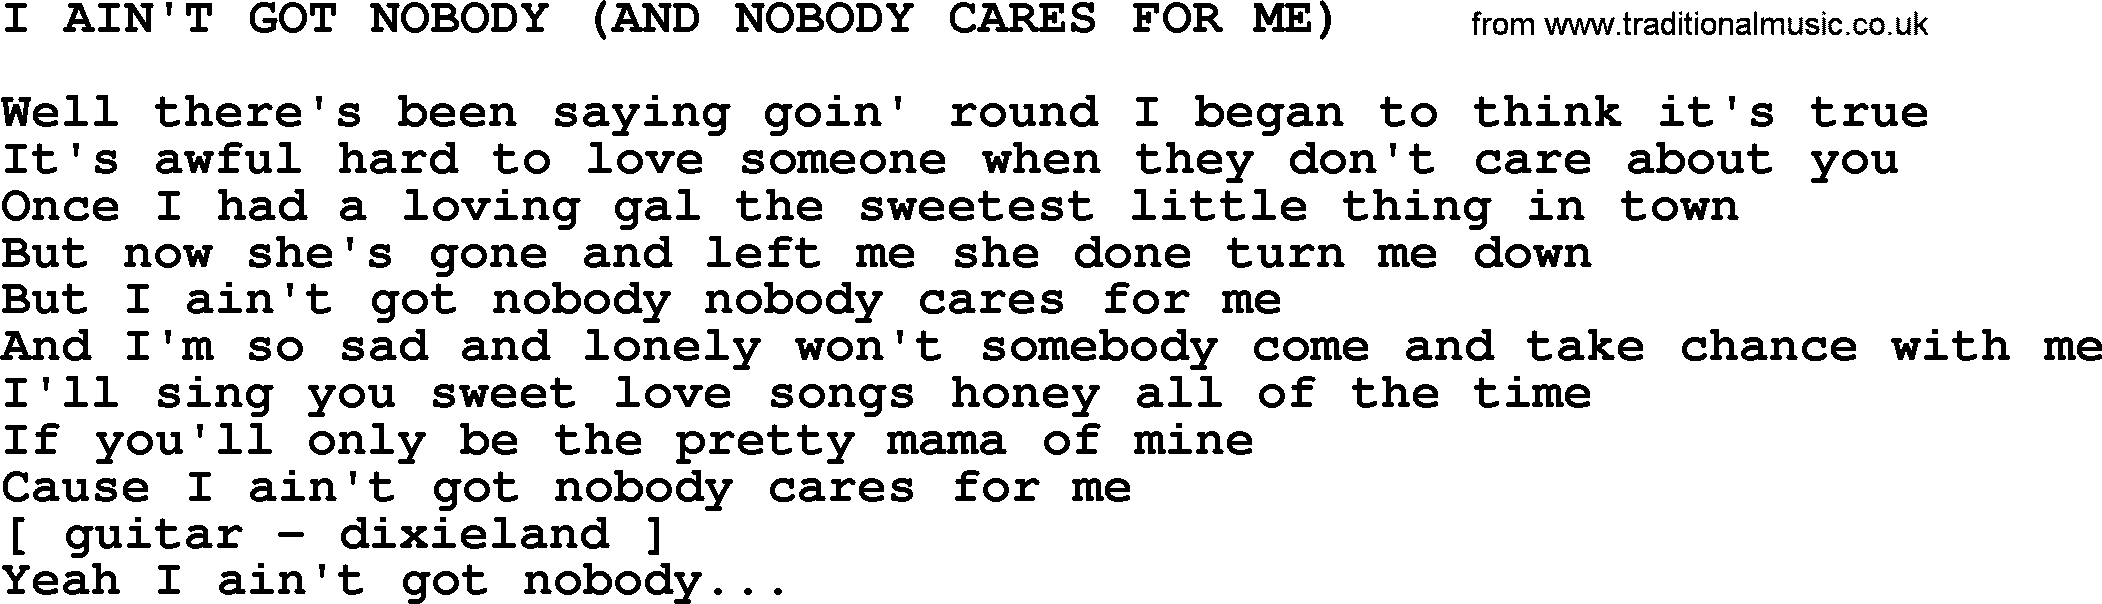 Merle Haggard song: I Ain't Got Nobody And Nobody Cares For Me, lyrics.